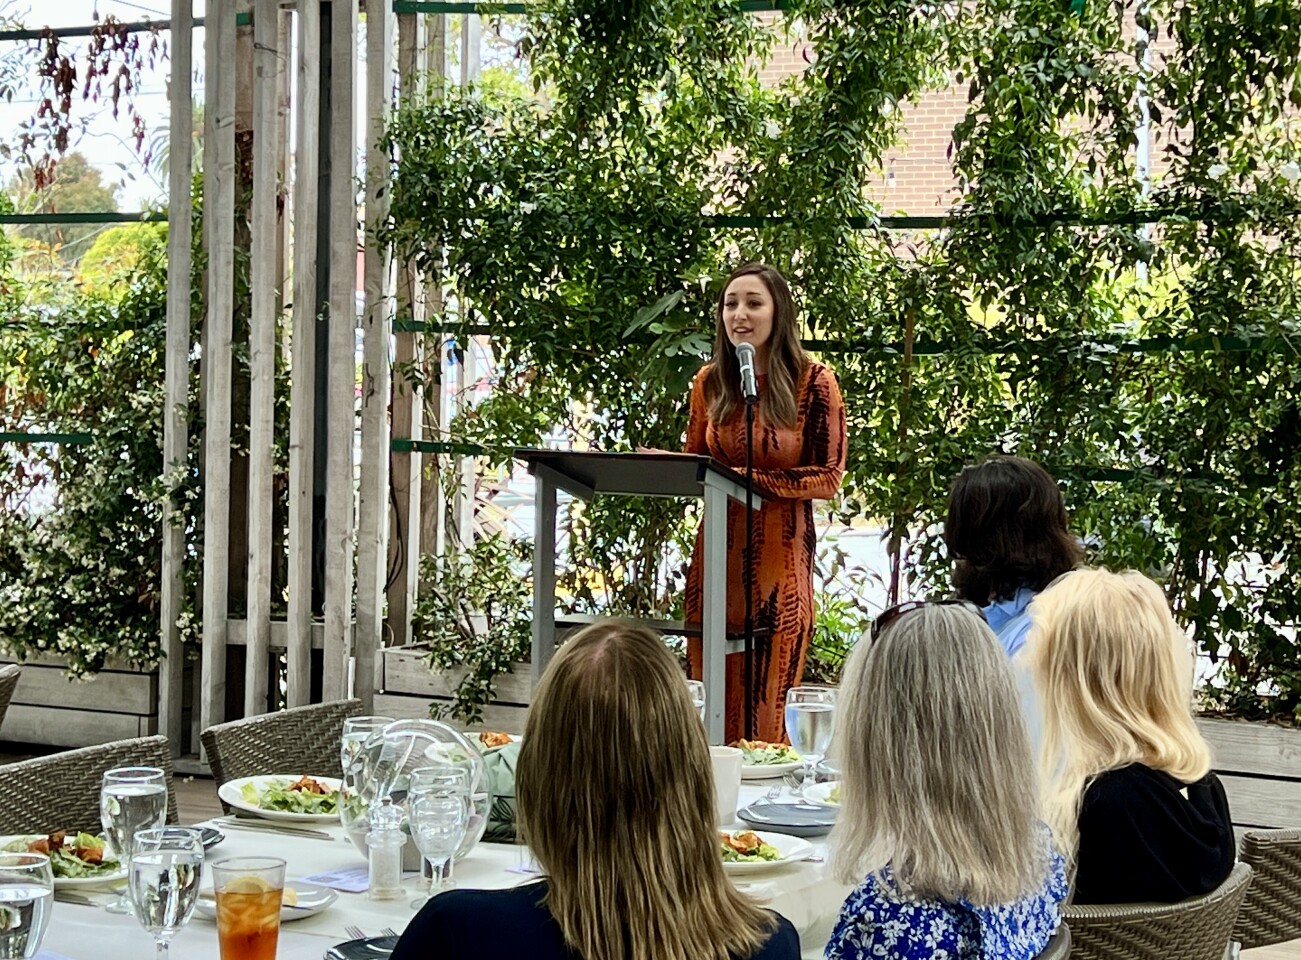 St. Germaine Children's Charity President Katie Christensen speaks at the group's annual luncheon June 7 at The Lot La Jolla.